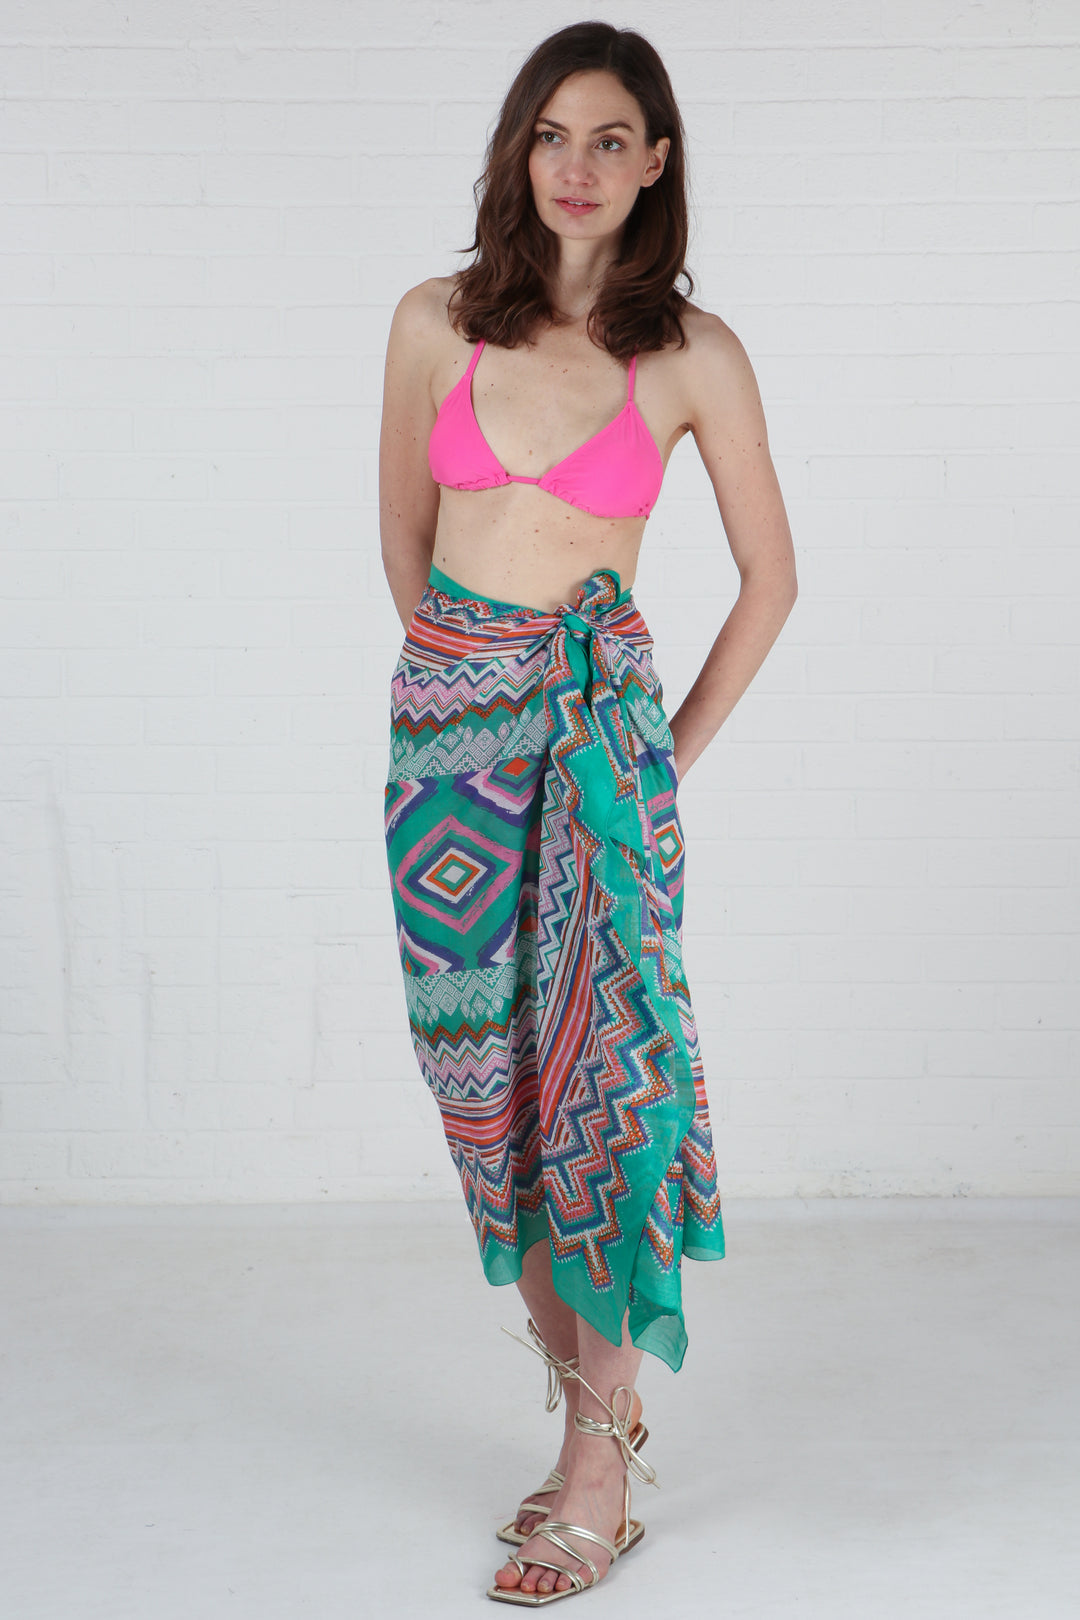 model wearing a green geometric print scarf as a beach cover up sarong